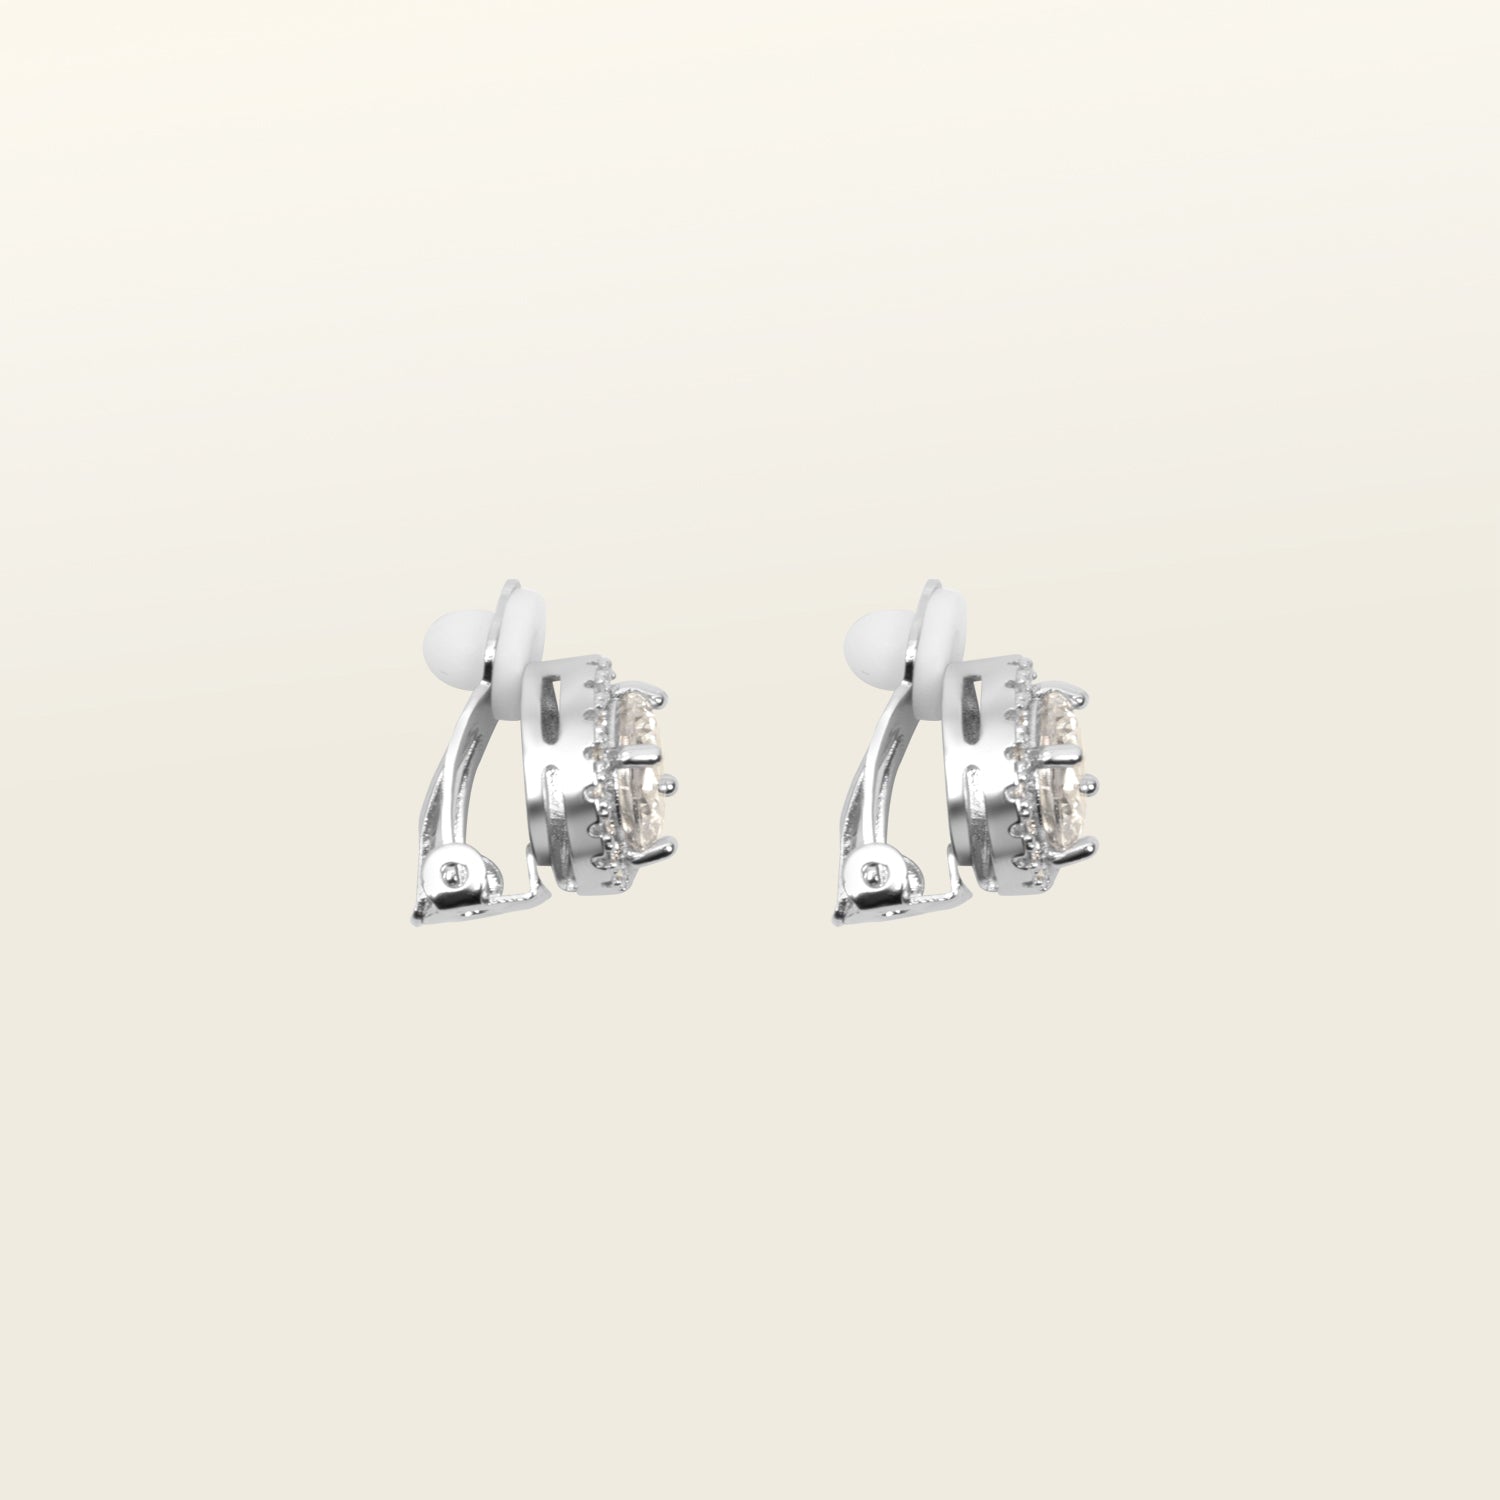 Image of the Harper Stud clip-on earrings features a secure hold, with a maximum comfortable wear duration of 8 to 12 hours. It is ideal for all ear types, including thick/large, sensitive, small/thin, and stretched/healing types. It is made with a silver-tone copper alloy and cubic zirconia, and comes with a removable rubber padding for added comfort. Please note: only one pair is included.